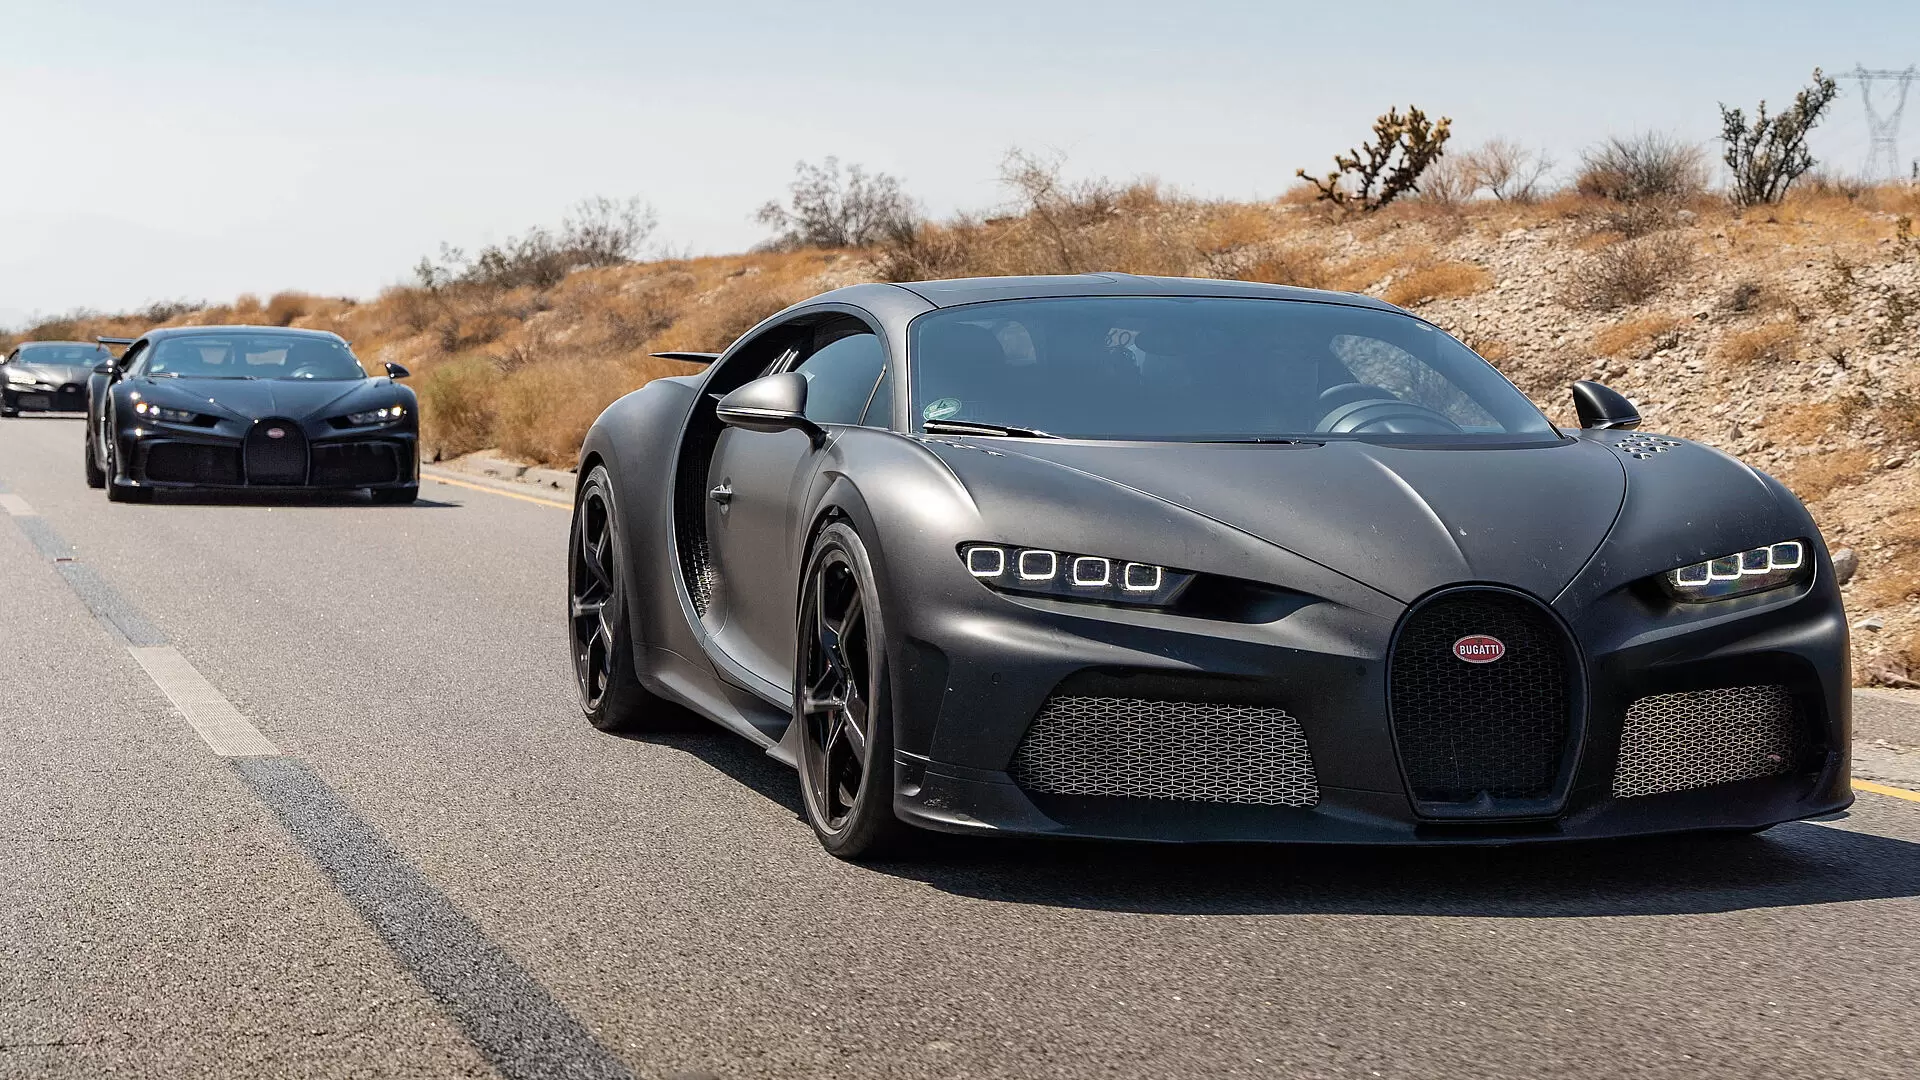 Bugatti's convoy of hyper sports cars on the testing route